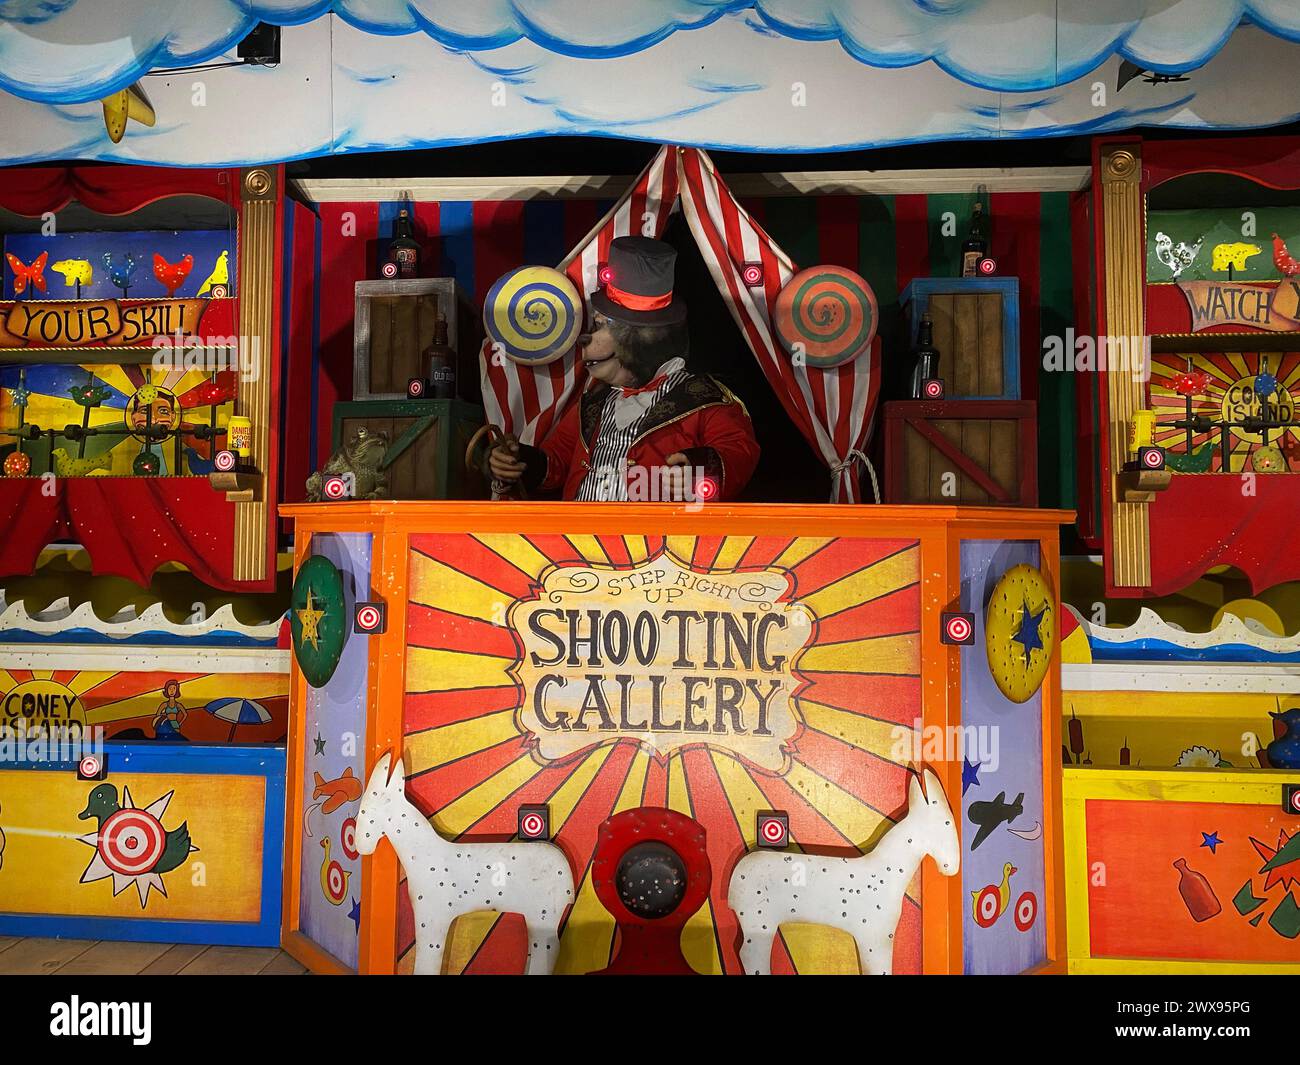 A vibrant vintage-style shooting gallery at a carnival with an animatronic bear dressed as a carnival barker inviting participants to test their aim Stock Photo